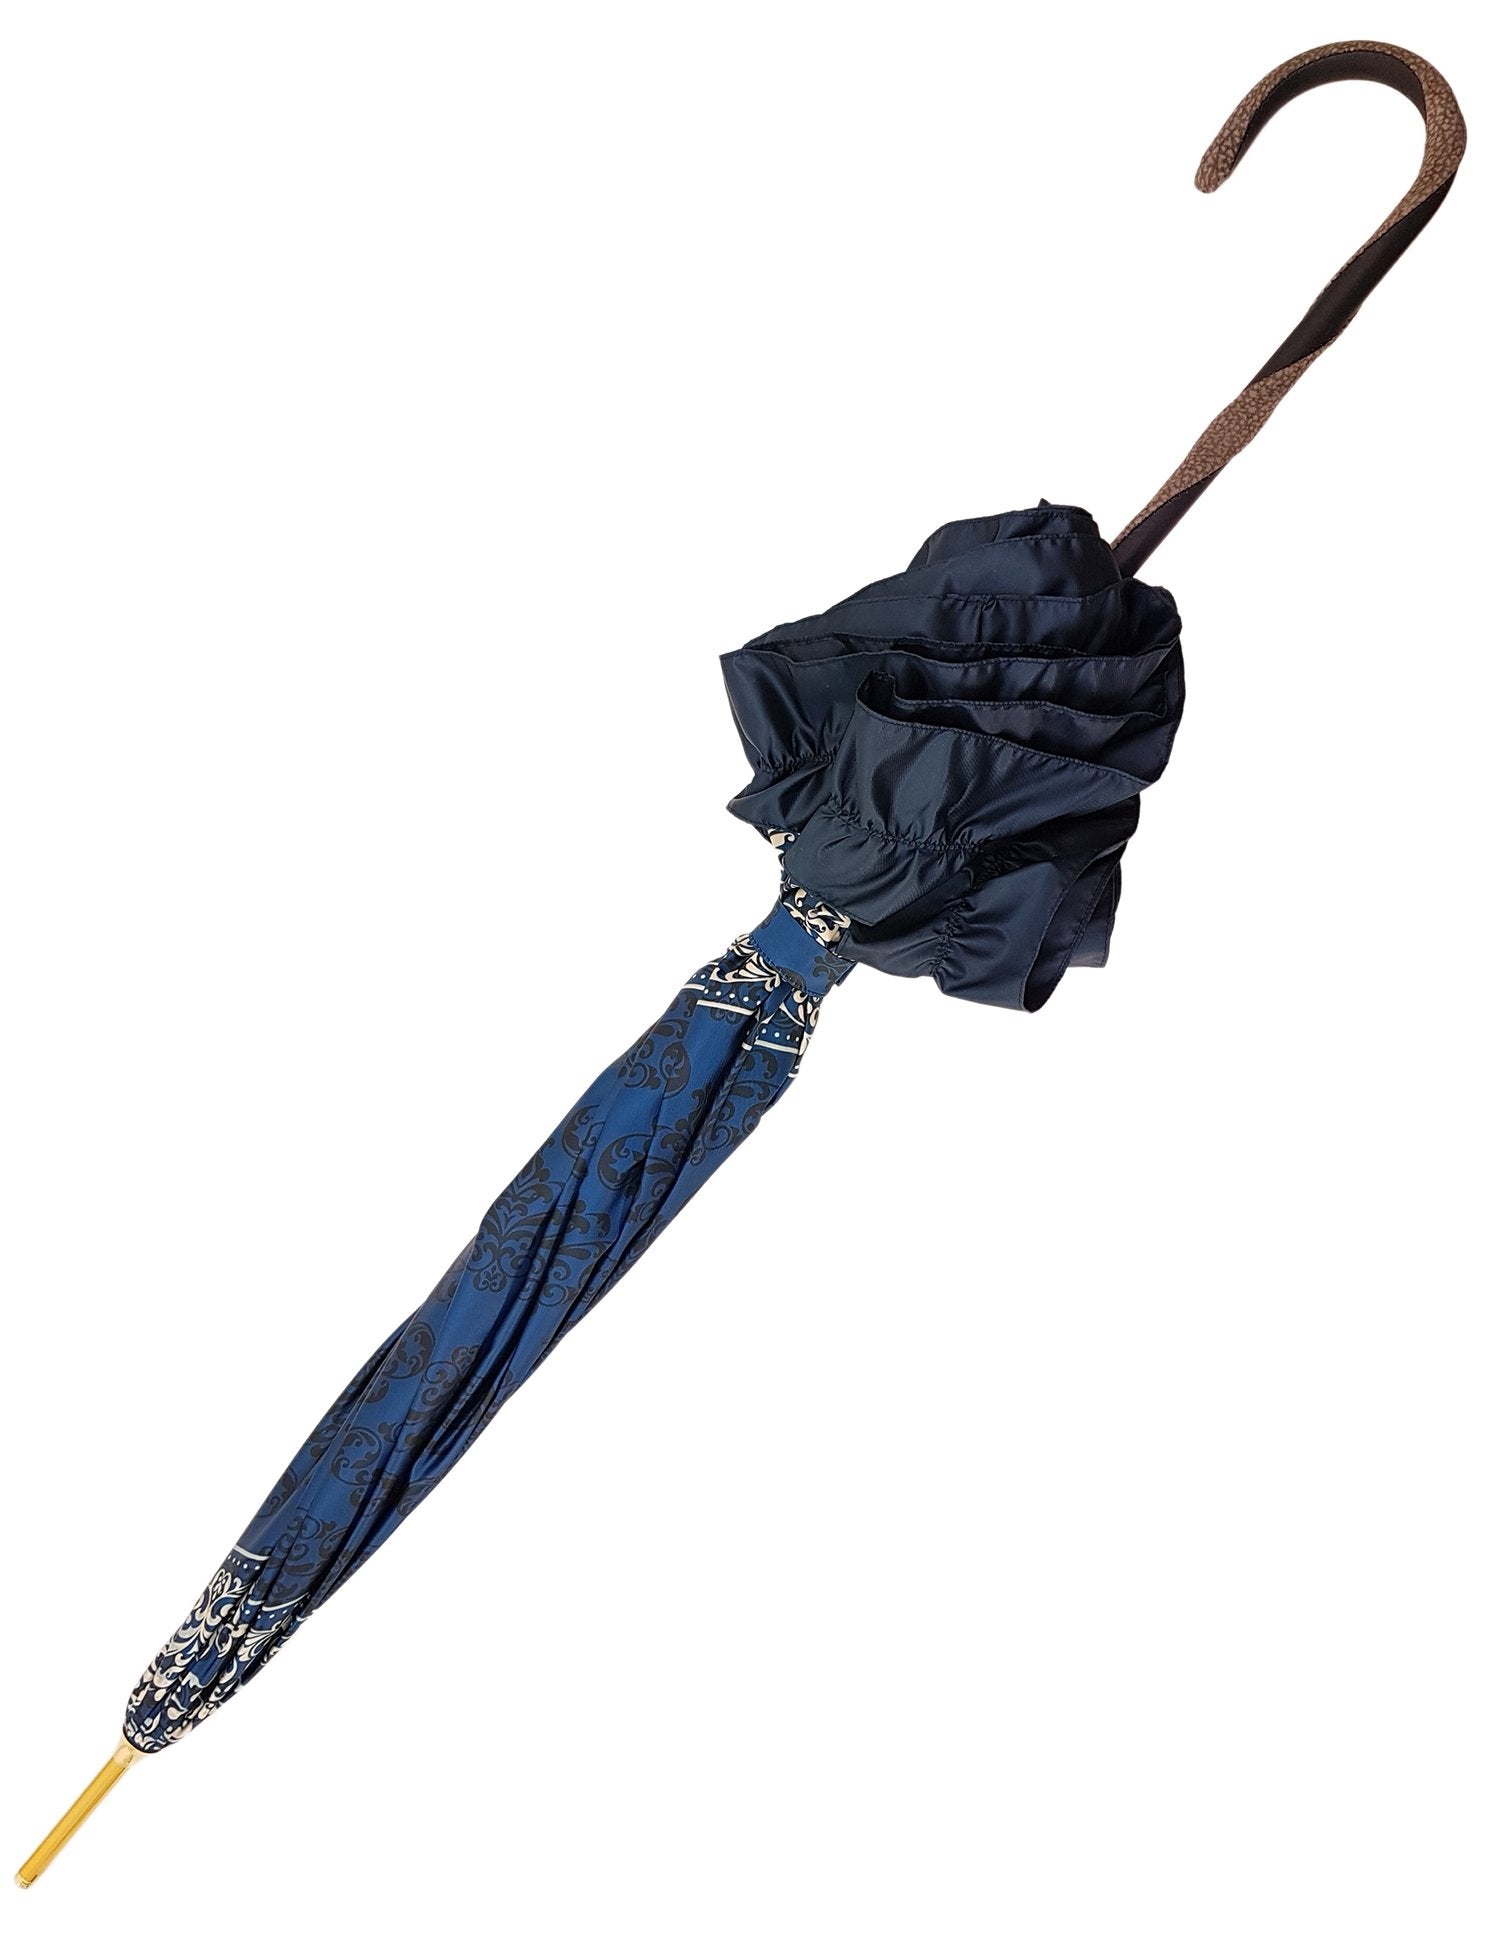 Women's umbrella Studied with a White & Black Pattern on a Blue Canopy - il-marchesato